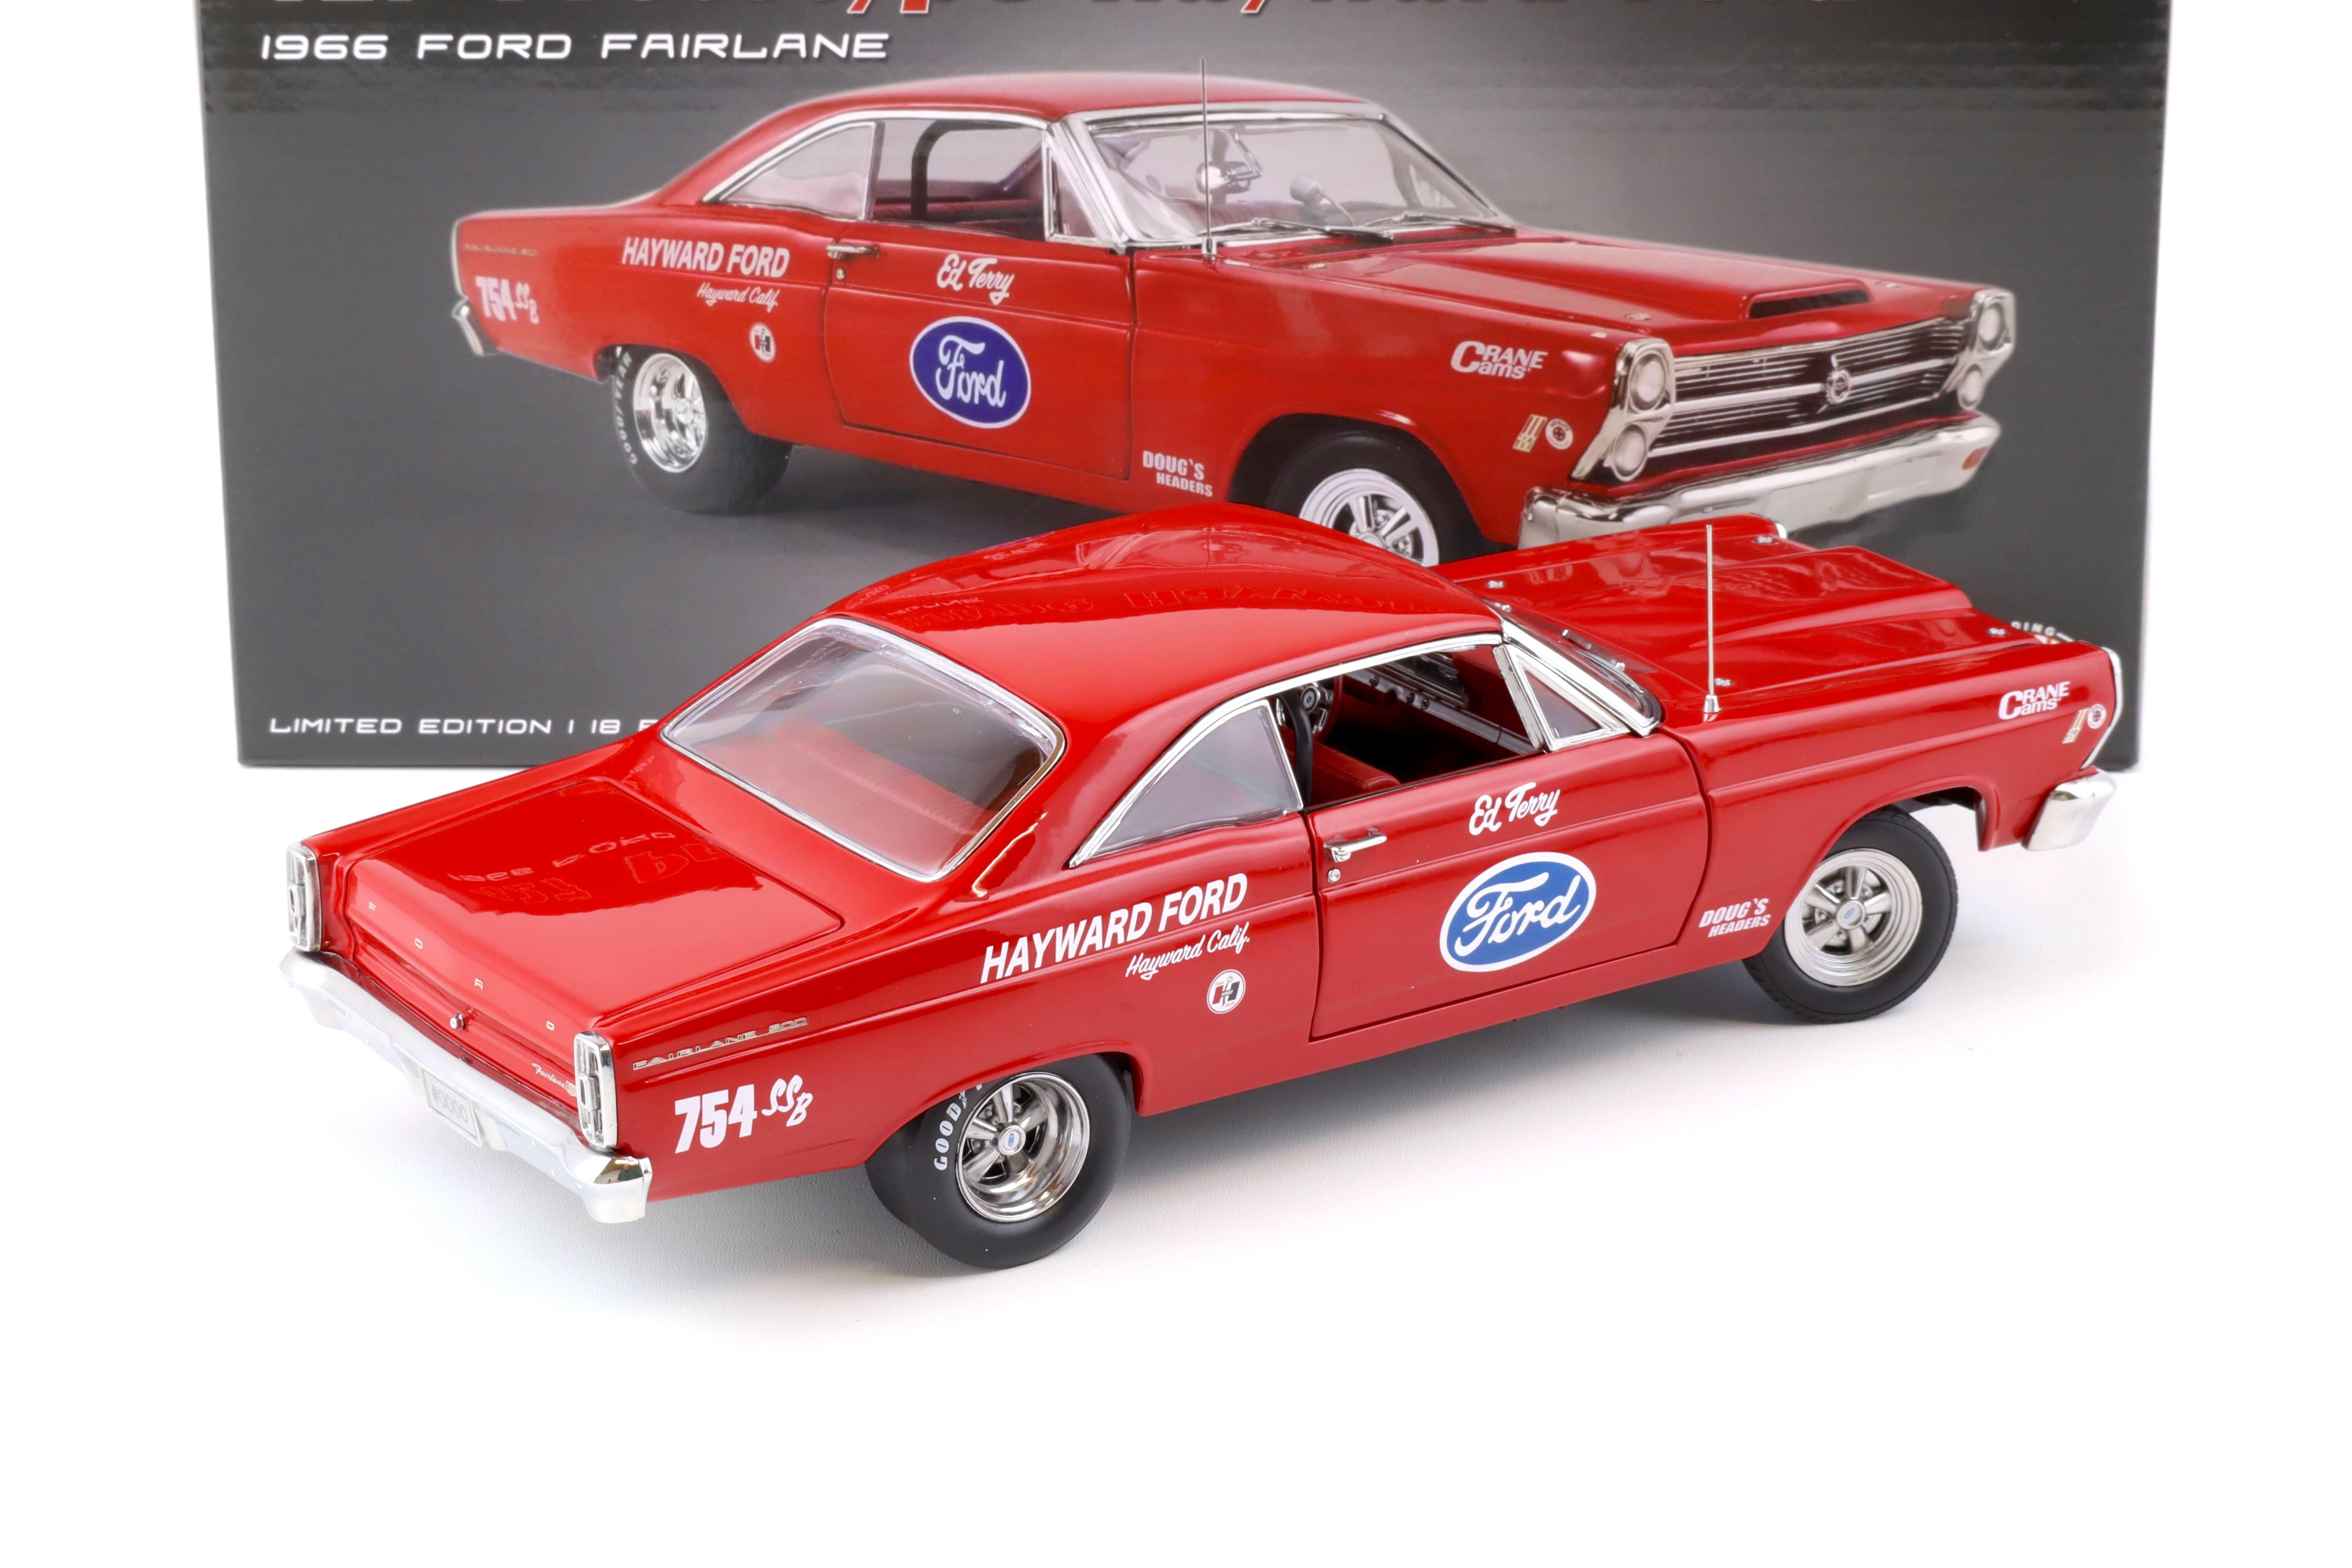 1:18 GMP 1966 Ford Fairlane 427 Prototype Hayward Ford Ed Terry red 18974